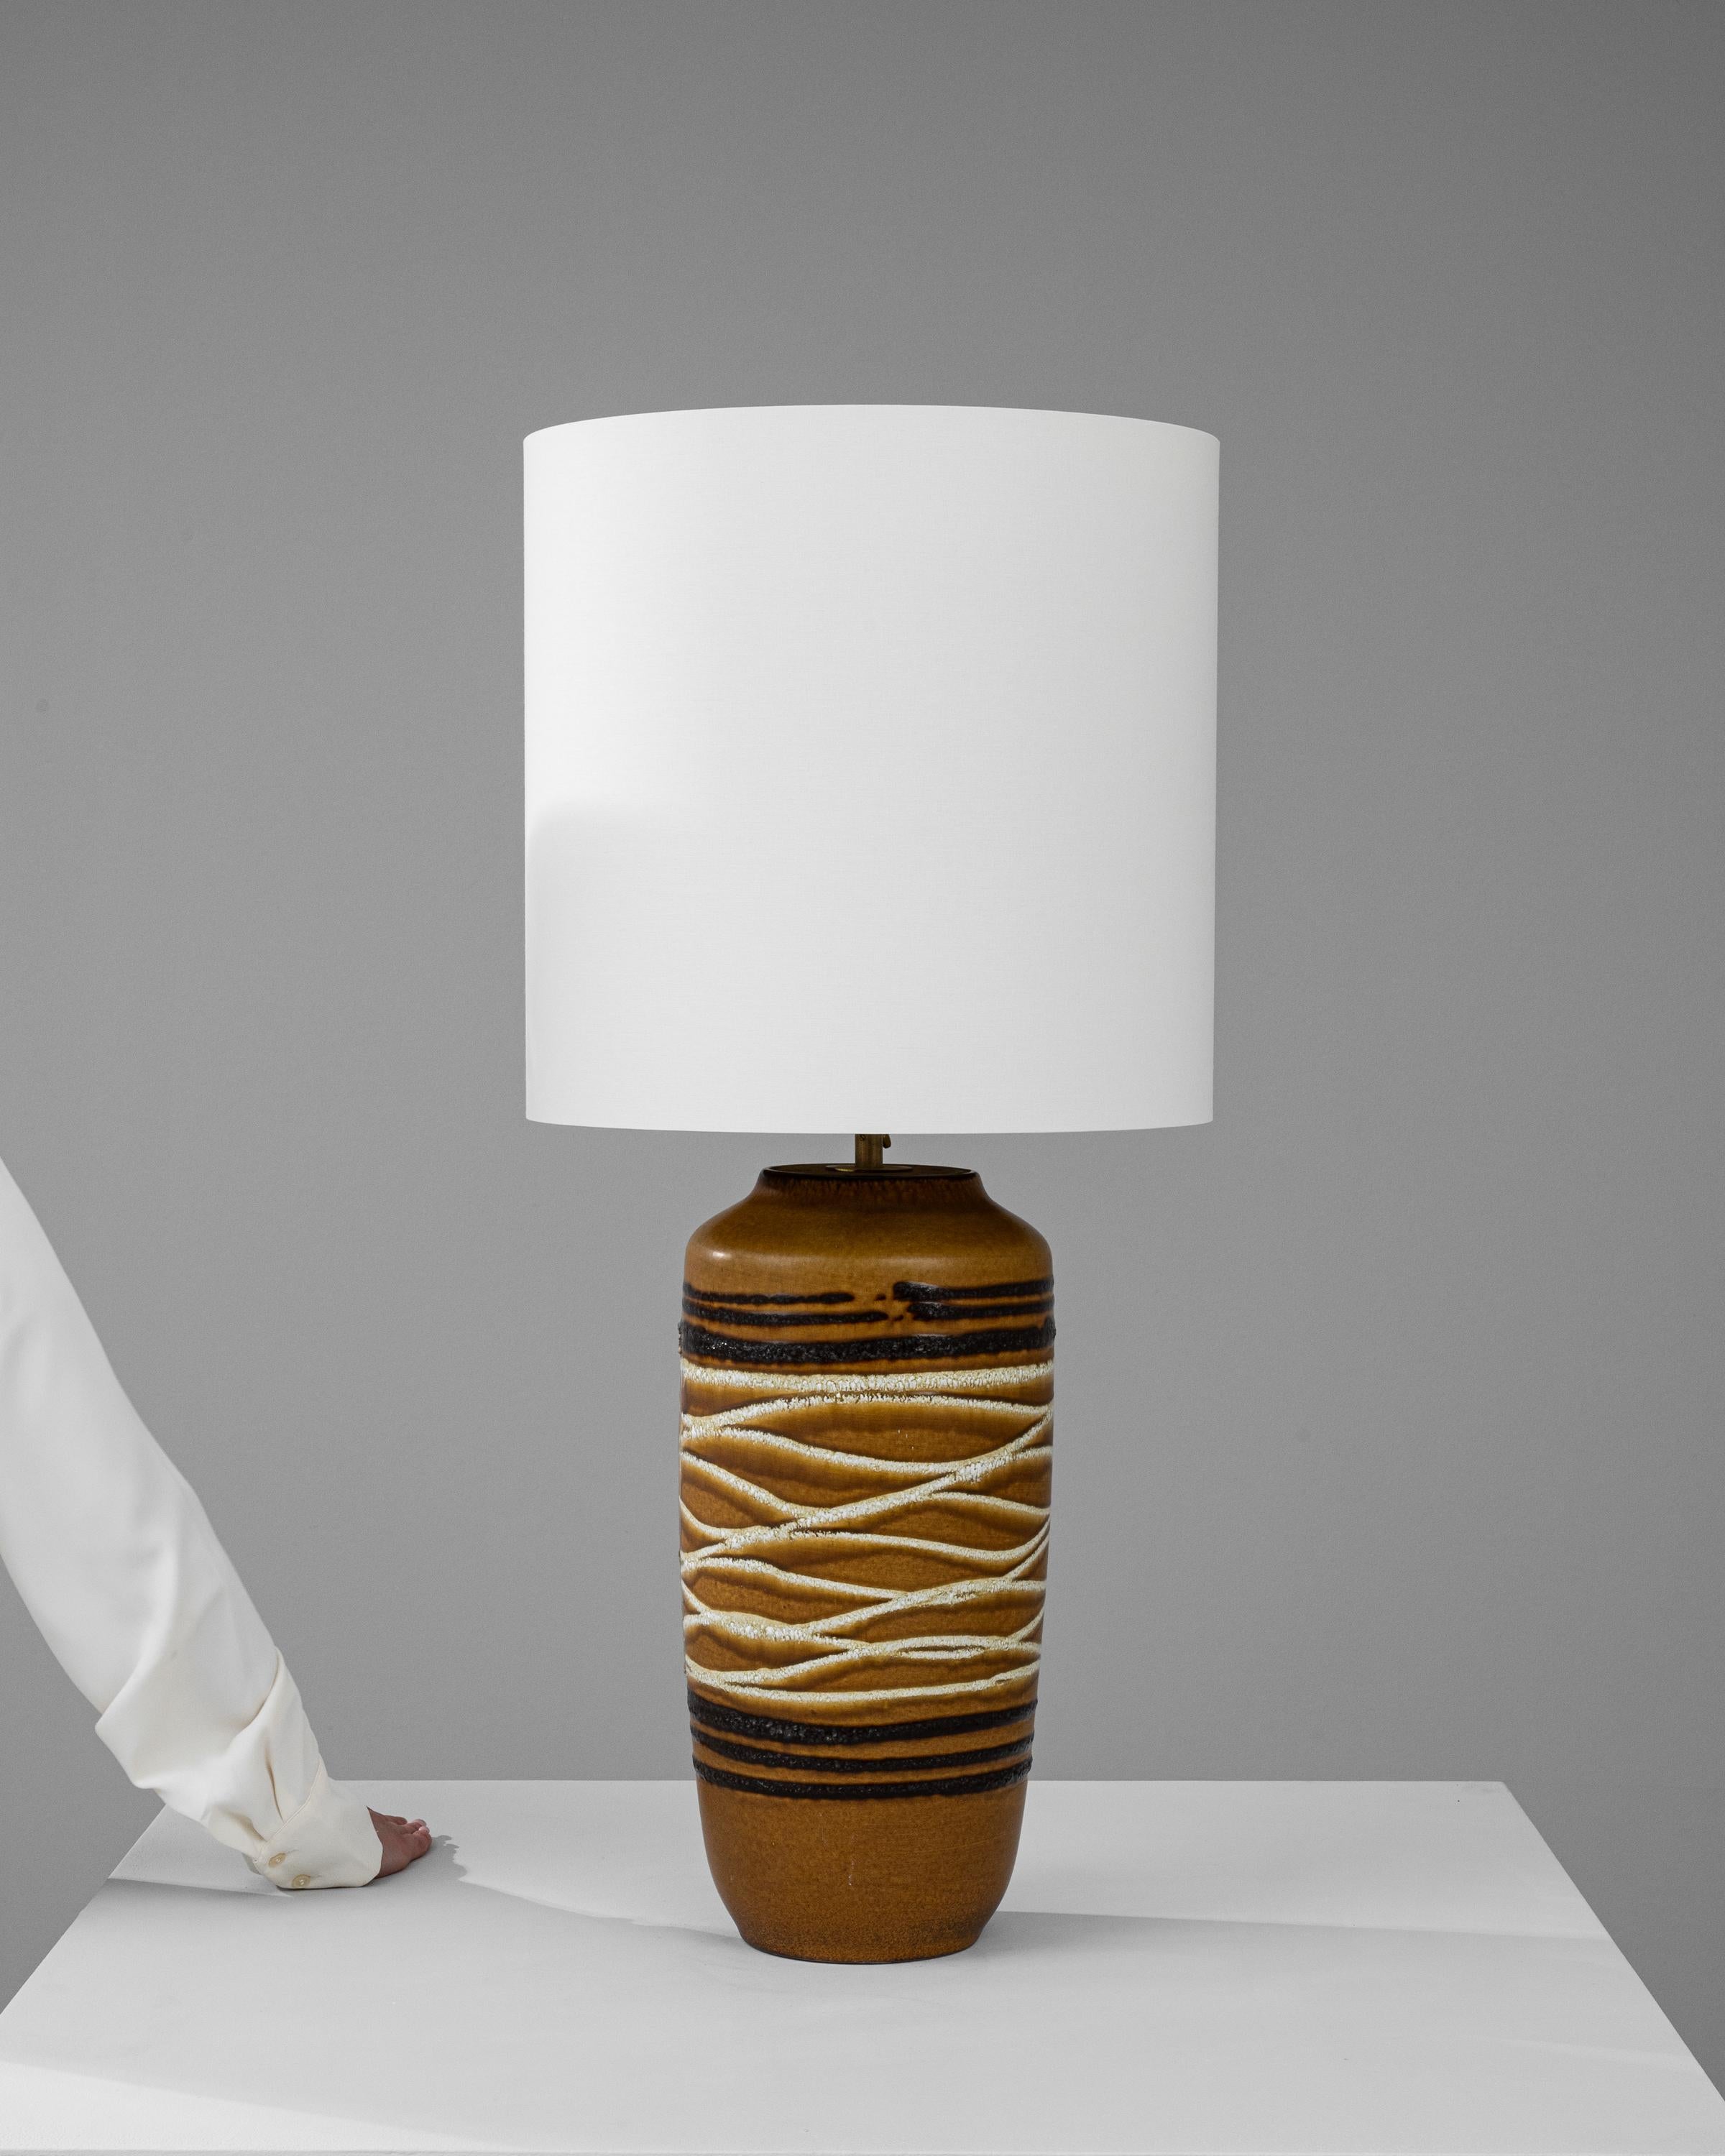 Step into a world of tactile intrigue with this 20th Century German Ceramic Table Lamp, a delightful fusion of traditional craftsmanship and rustic design. The lamp's base is adorned with a tactile motif of rope-like textures, wrapped around its